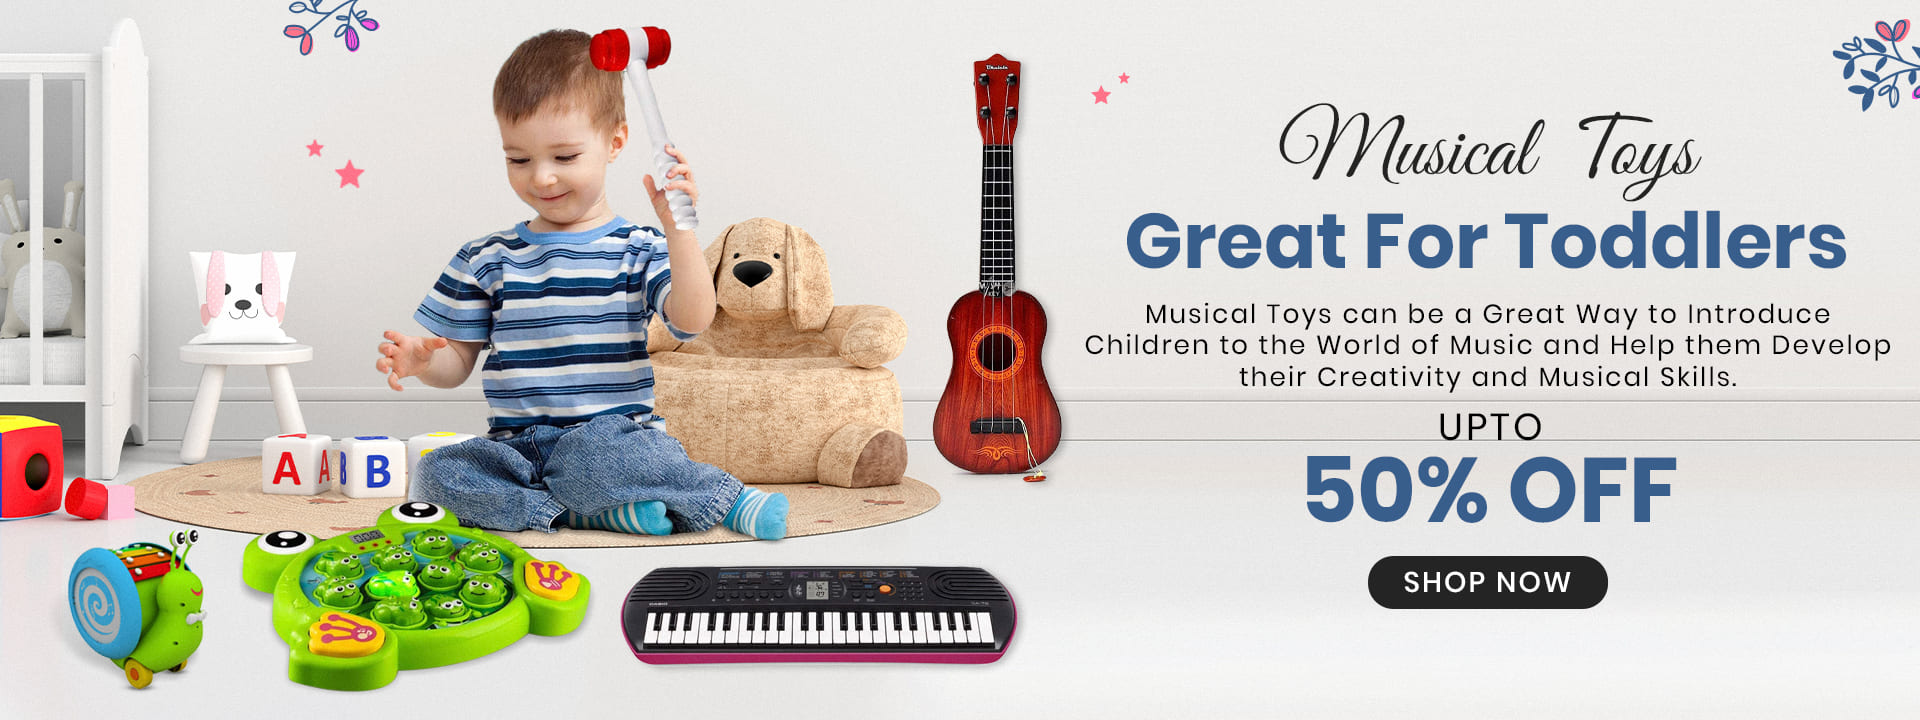 Musical toys for Toddlers